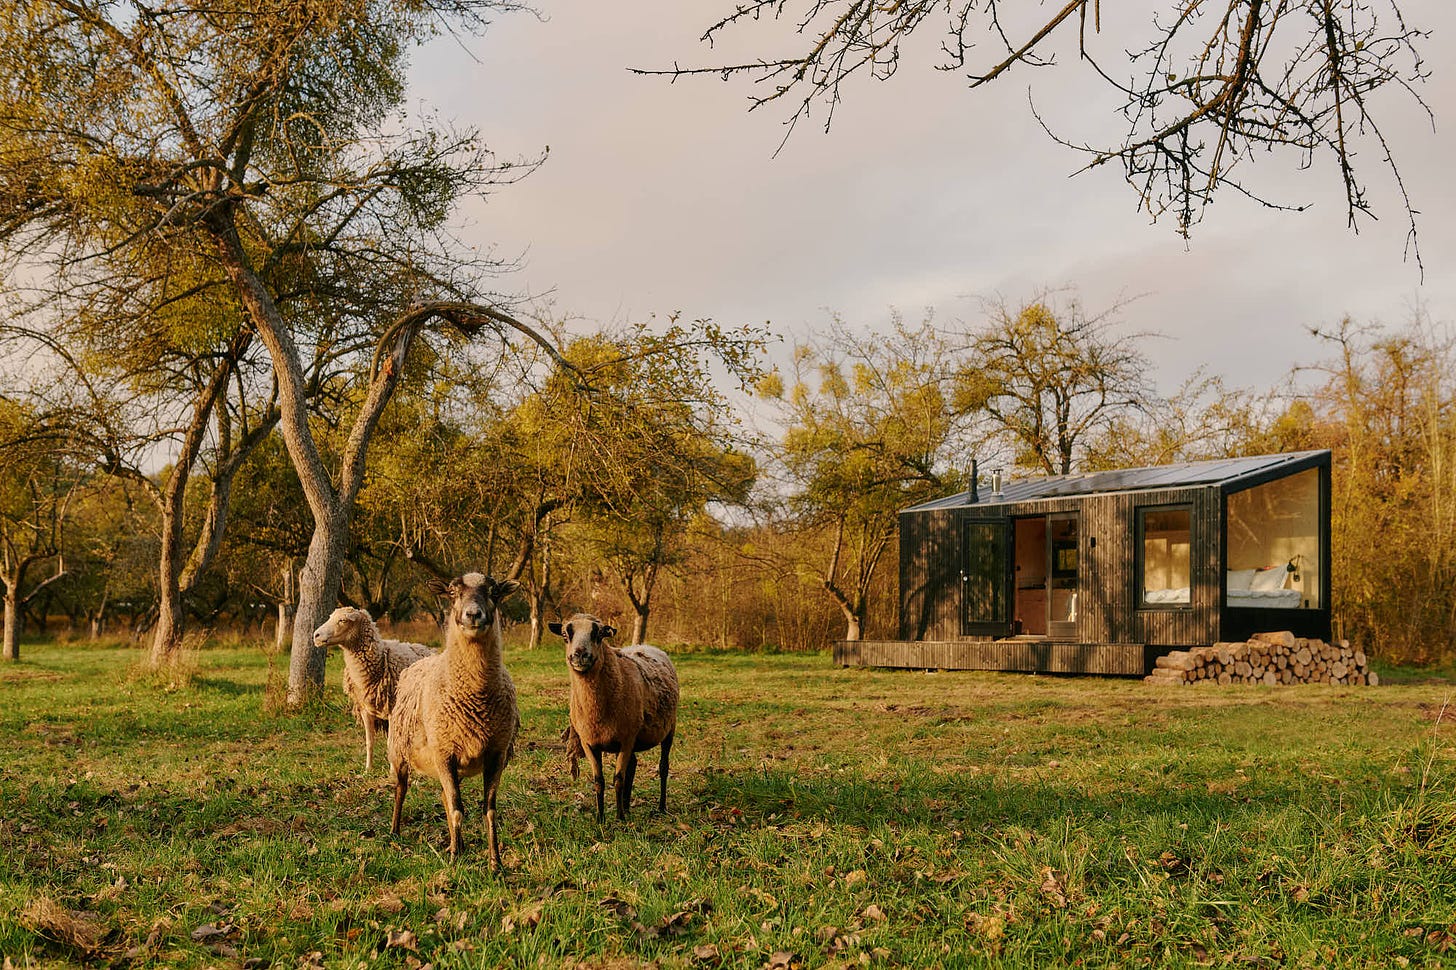 Three sheep in an orchard close to a black wooden cabin with a sloped roof and large windows